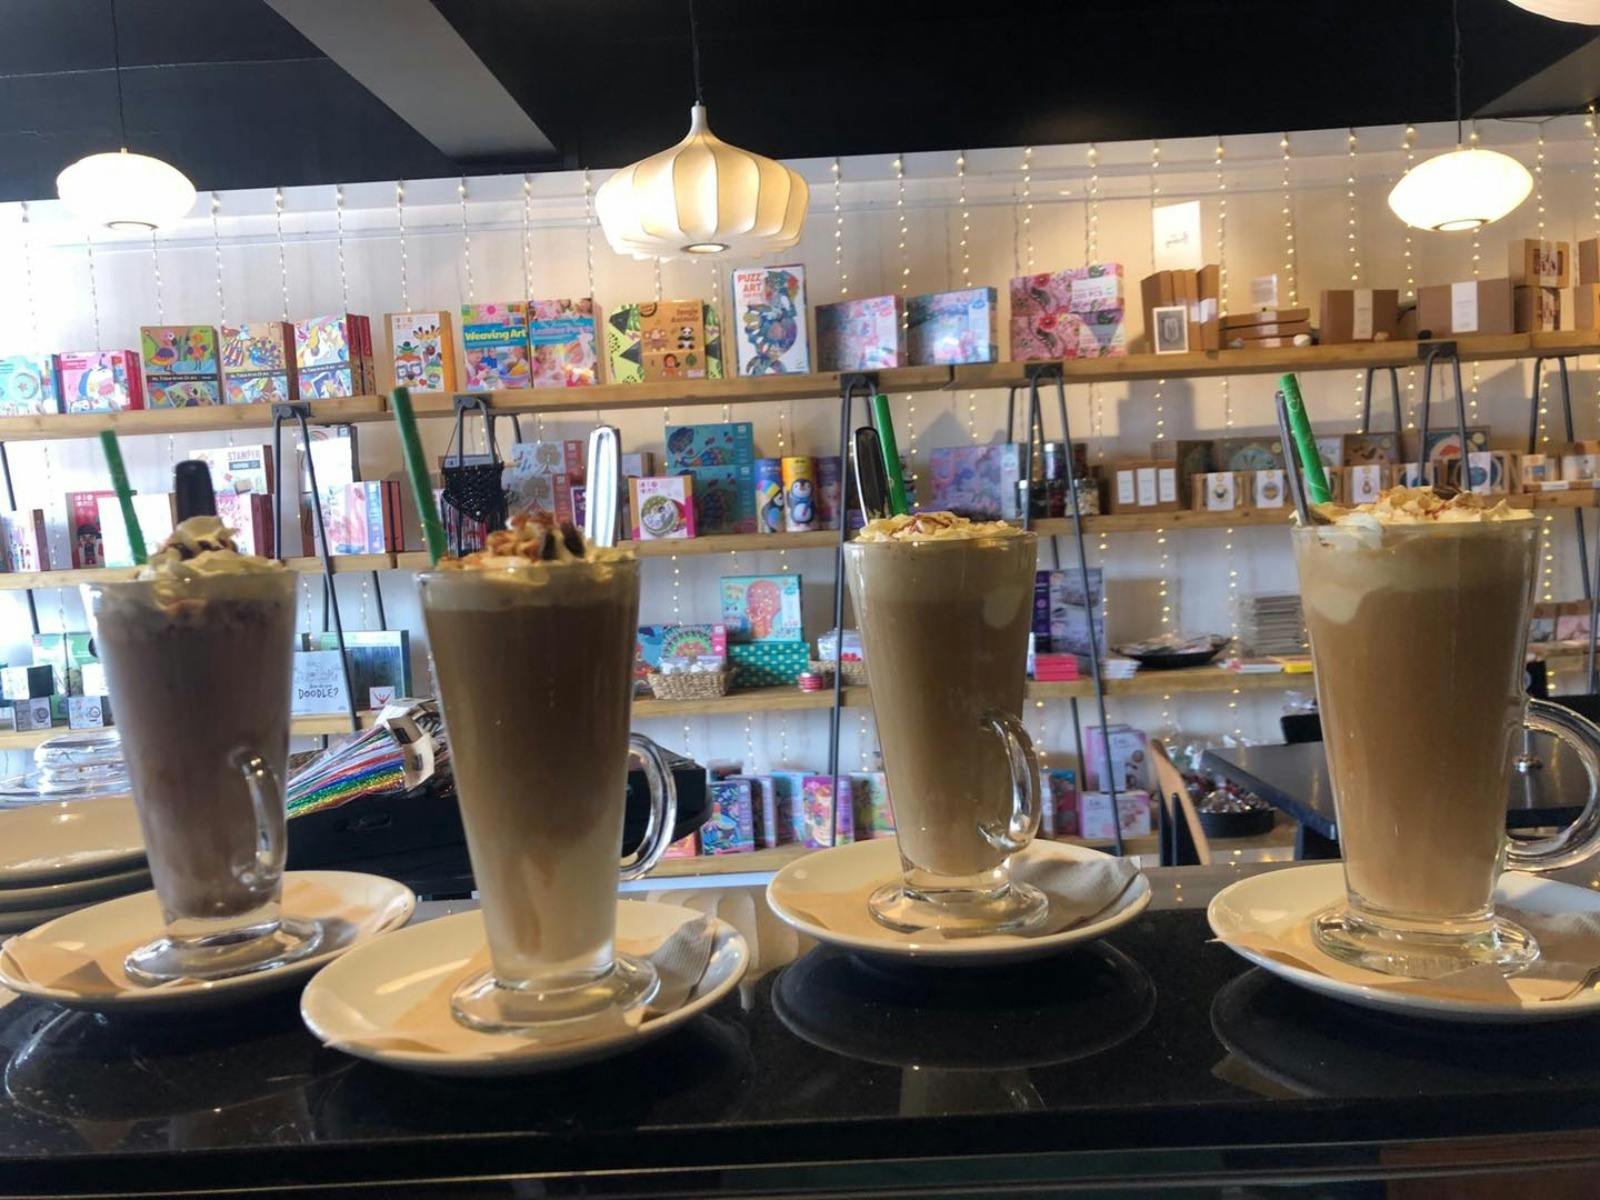 Four iced coffee drinks in tall glasses topped with cream sitting on the counter ready for customer